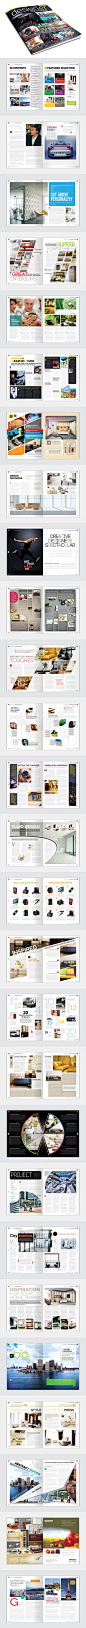 Magazine Template - InDesign 56 Page Layout V2 by BoxedCreative , via Behance